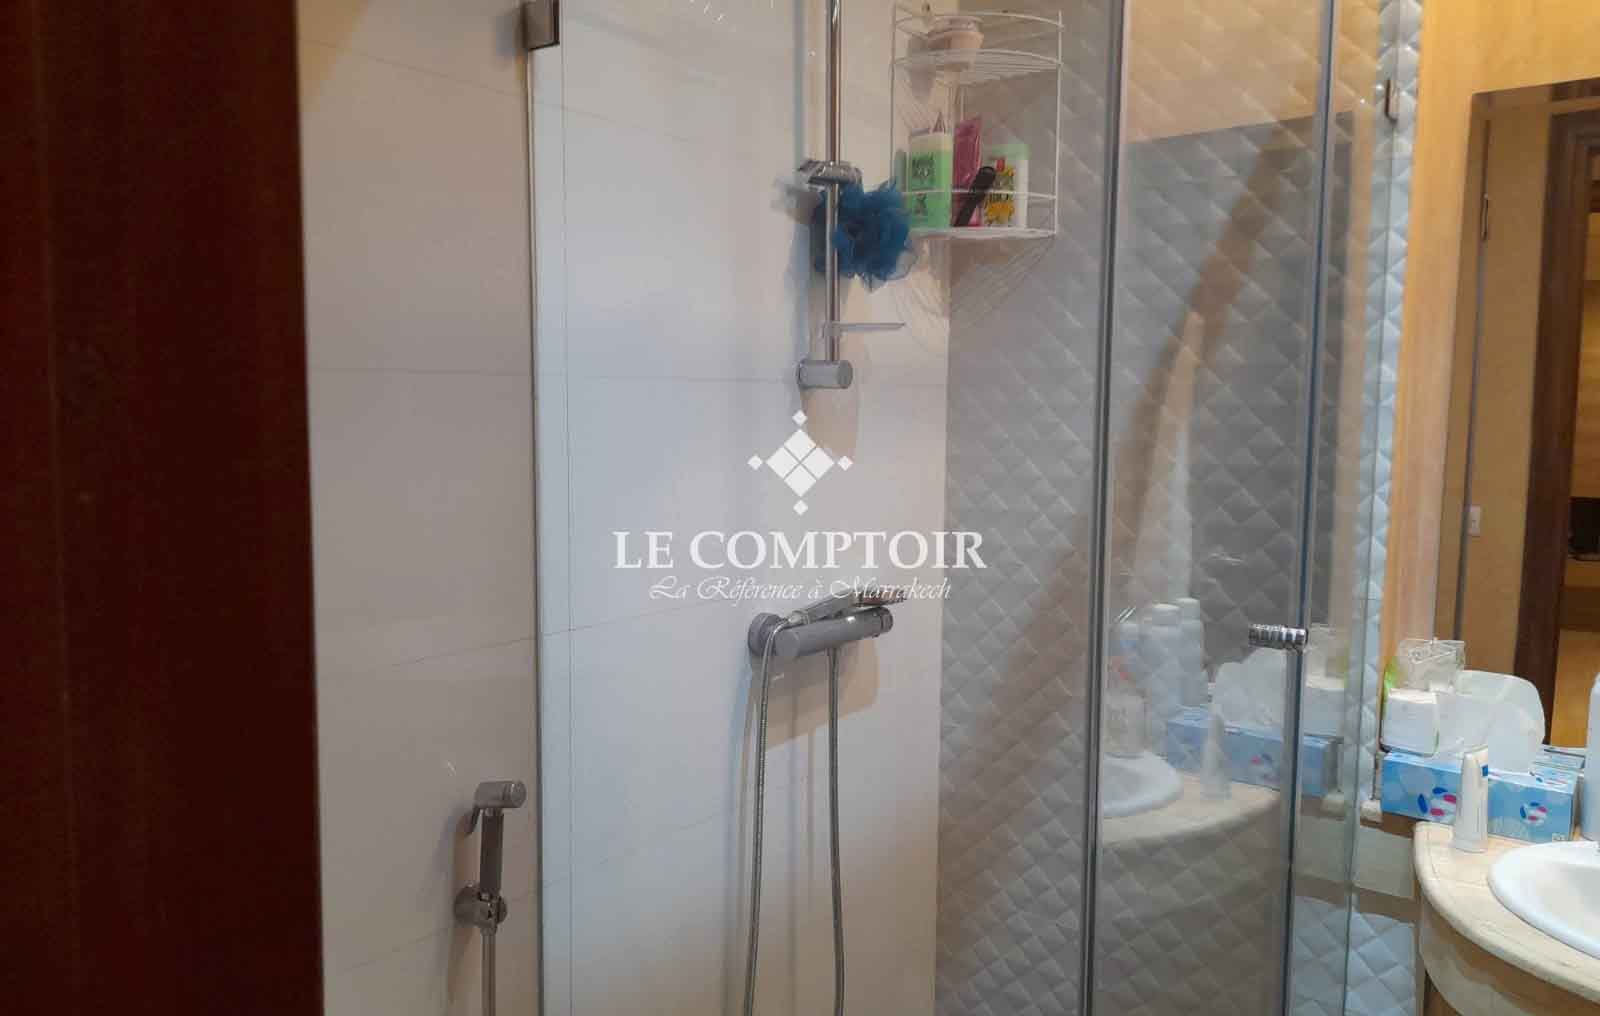 Le Comptoir Immobilier Agence Immobiliere Marrakech Location Appartement Camp El Ghoul Marrakech 2